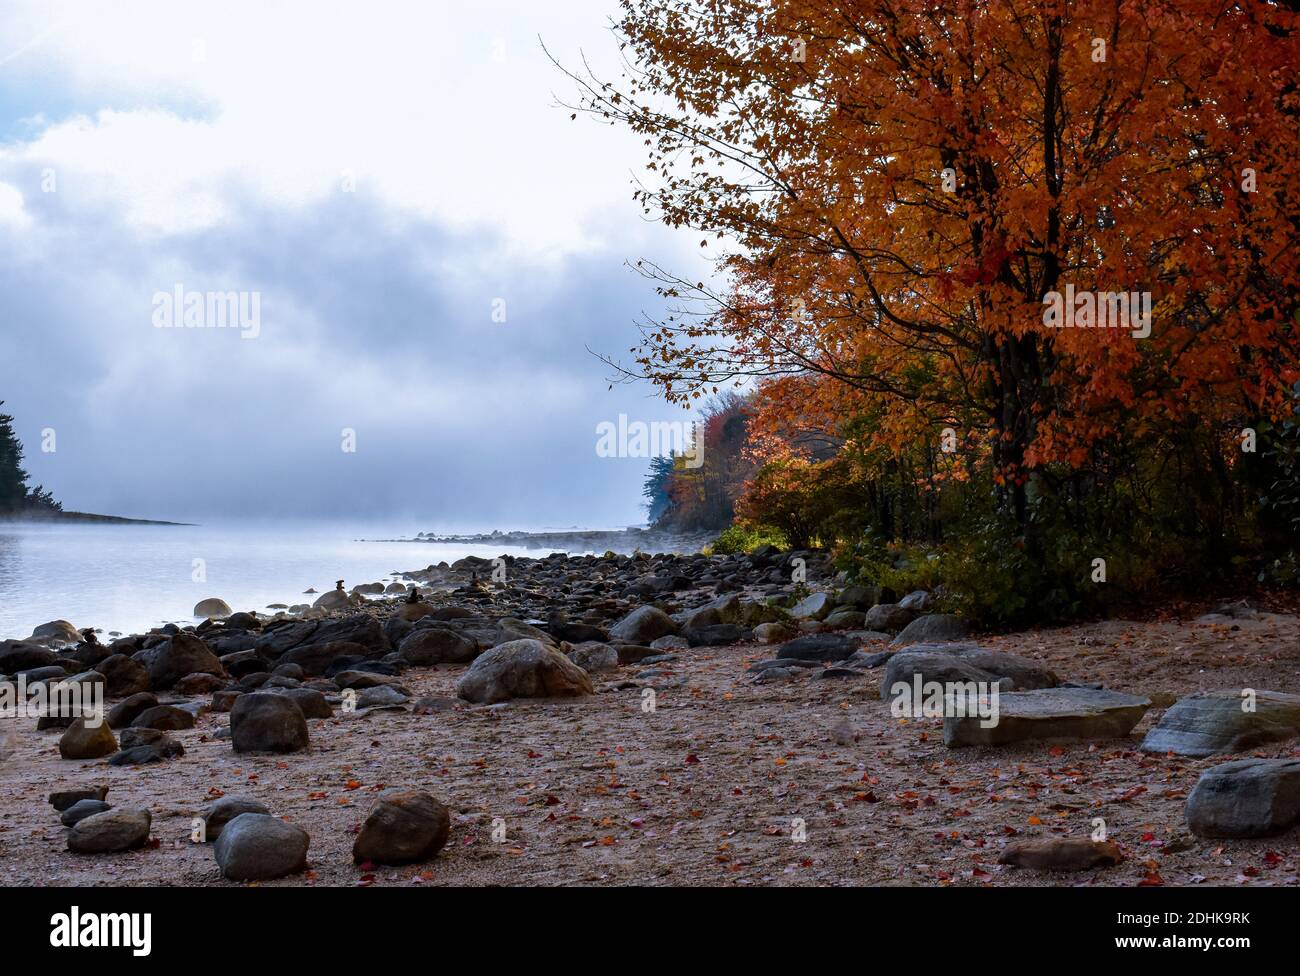 Fall colors in front of foggy lake herald the changing seasons. Stock Photo